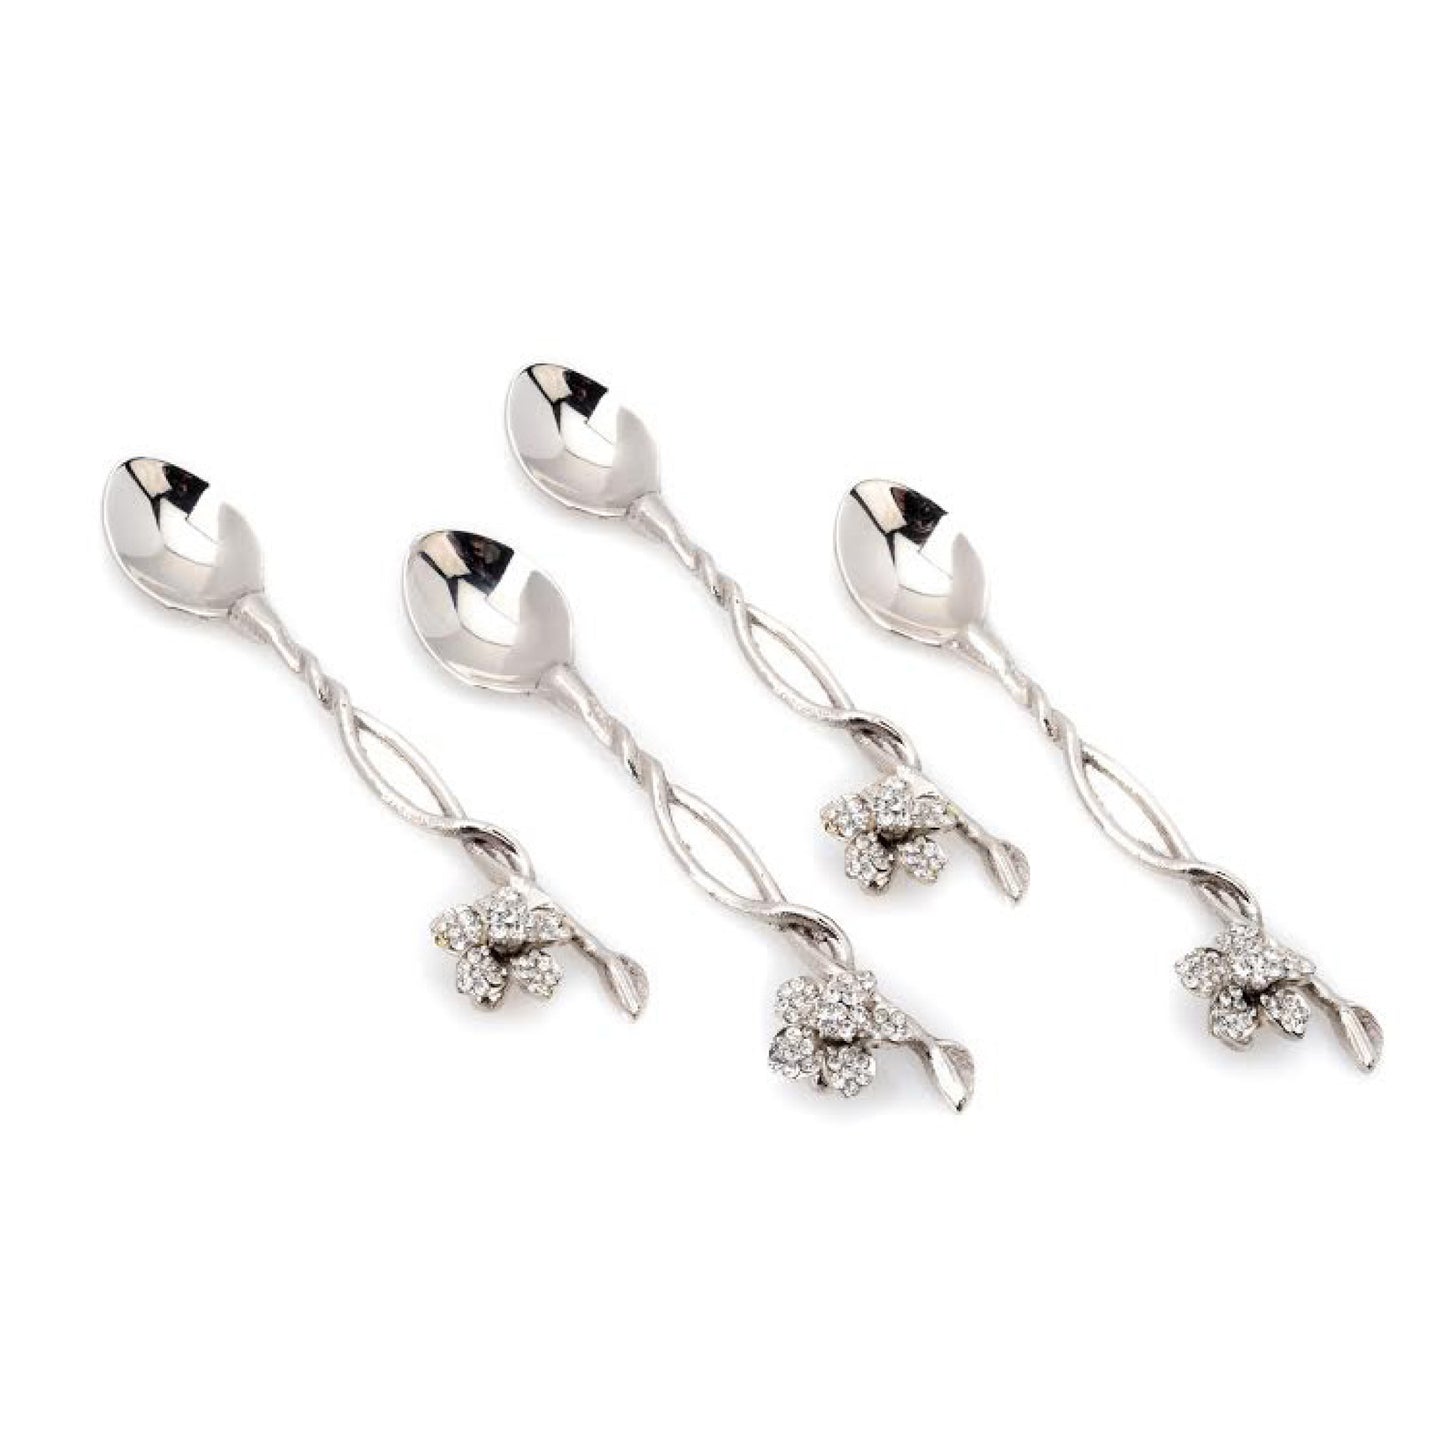 Set of 4 Spoons with Jeweled Flower